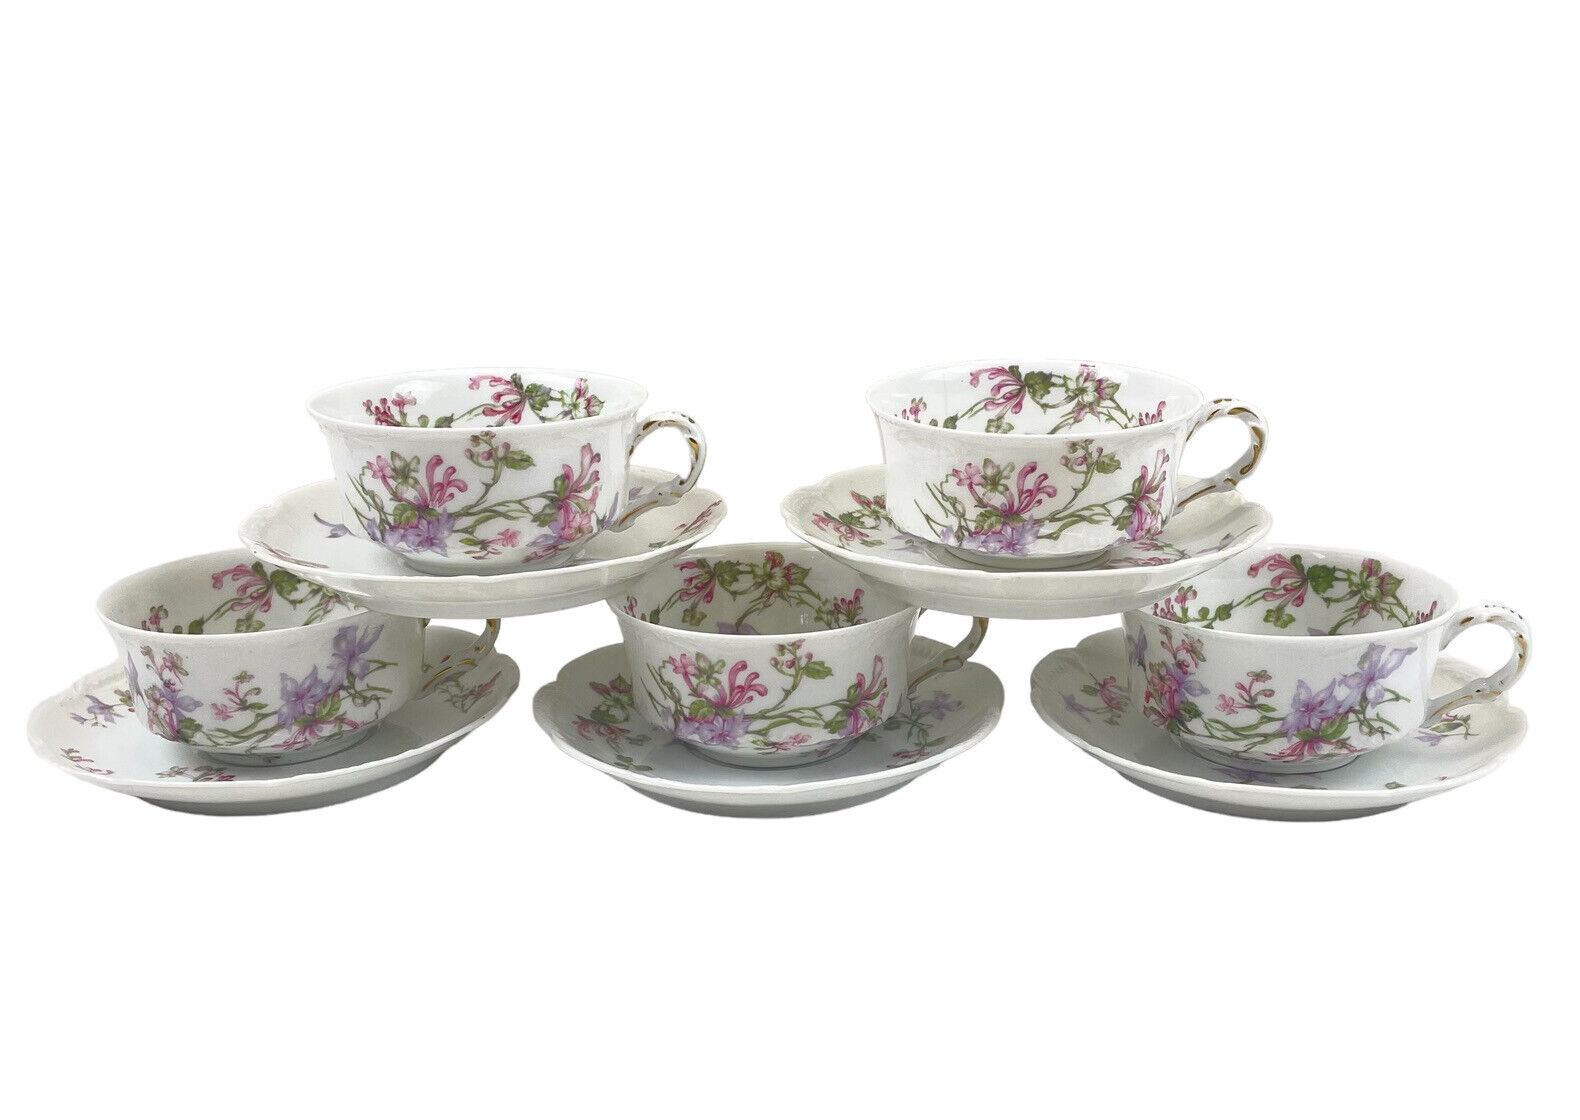 HAVILAND & CO LIMOGES Pink Purple Flower Gold Cup and Saucers 5 Sets (10 Pieces)